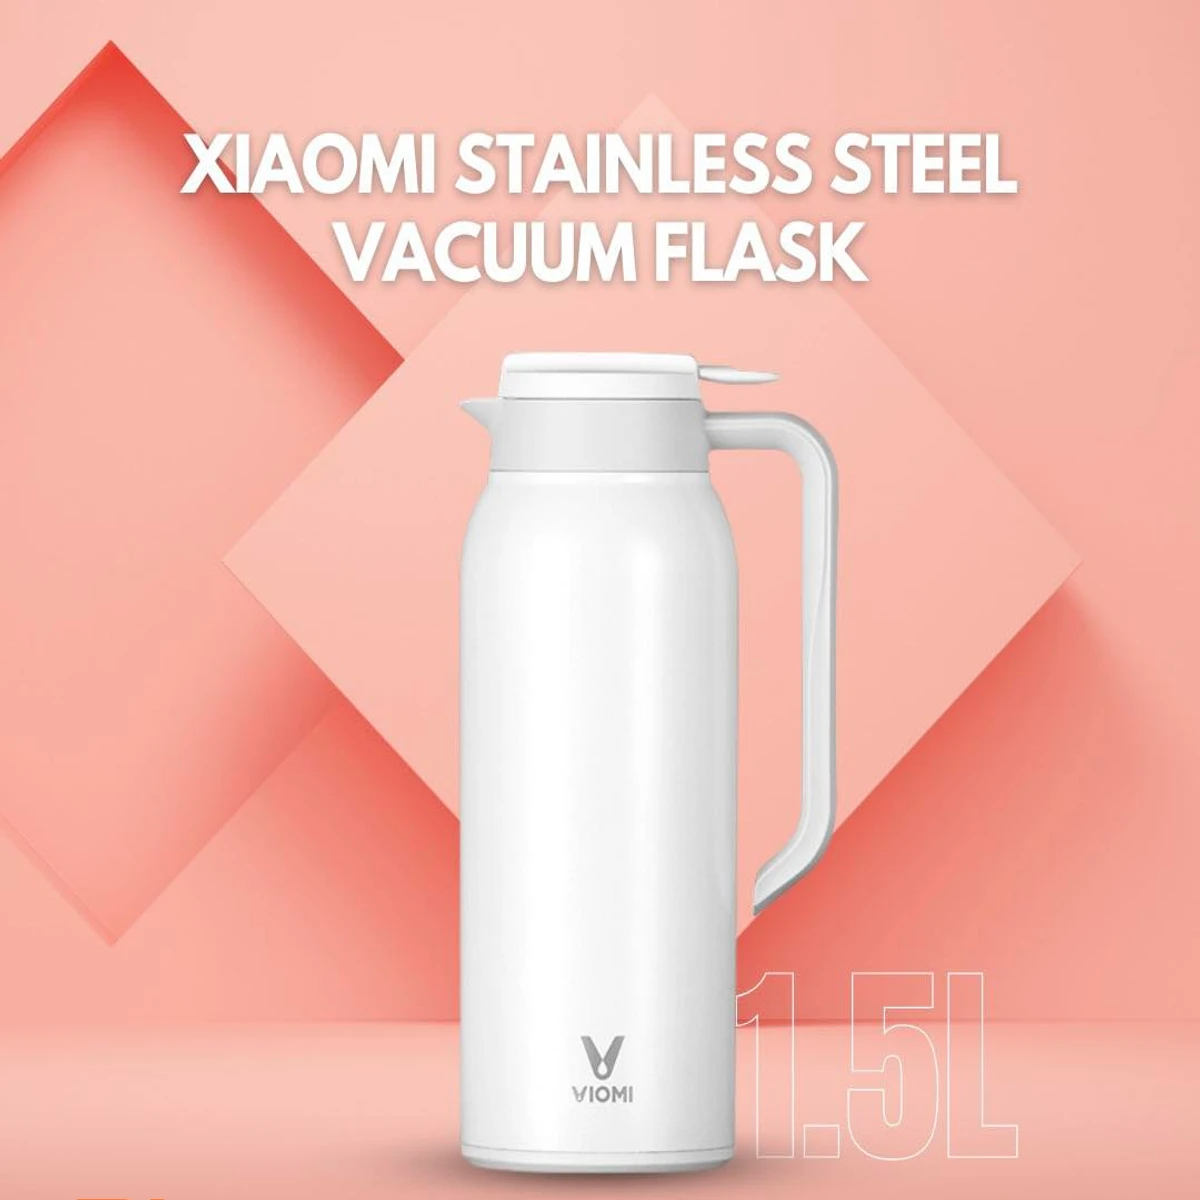 Xiaomi VIOMI 1.5L Thermo Mug Stainless Steel Vacuum Flask 24 Hours